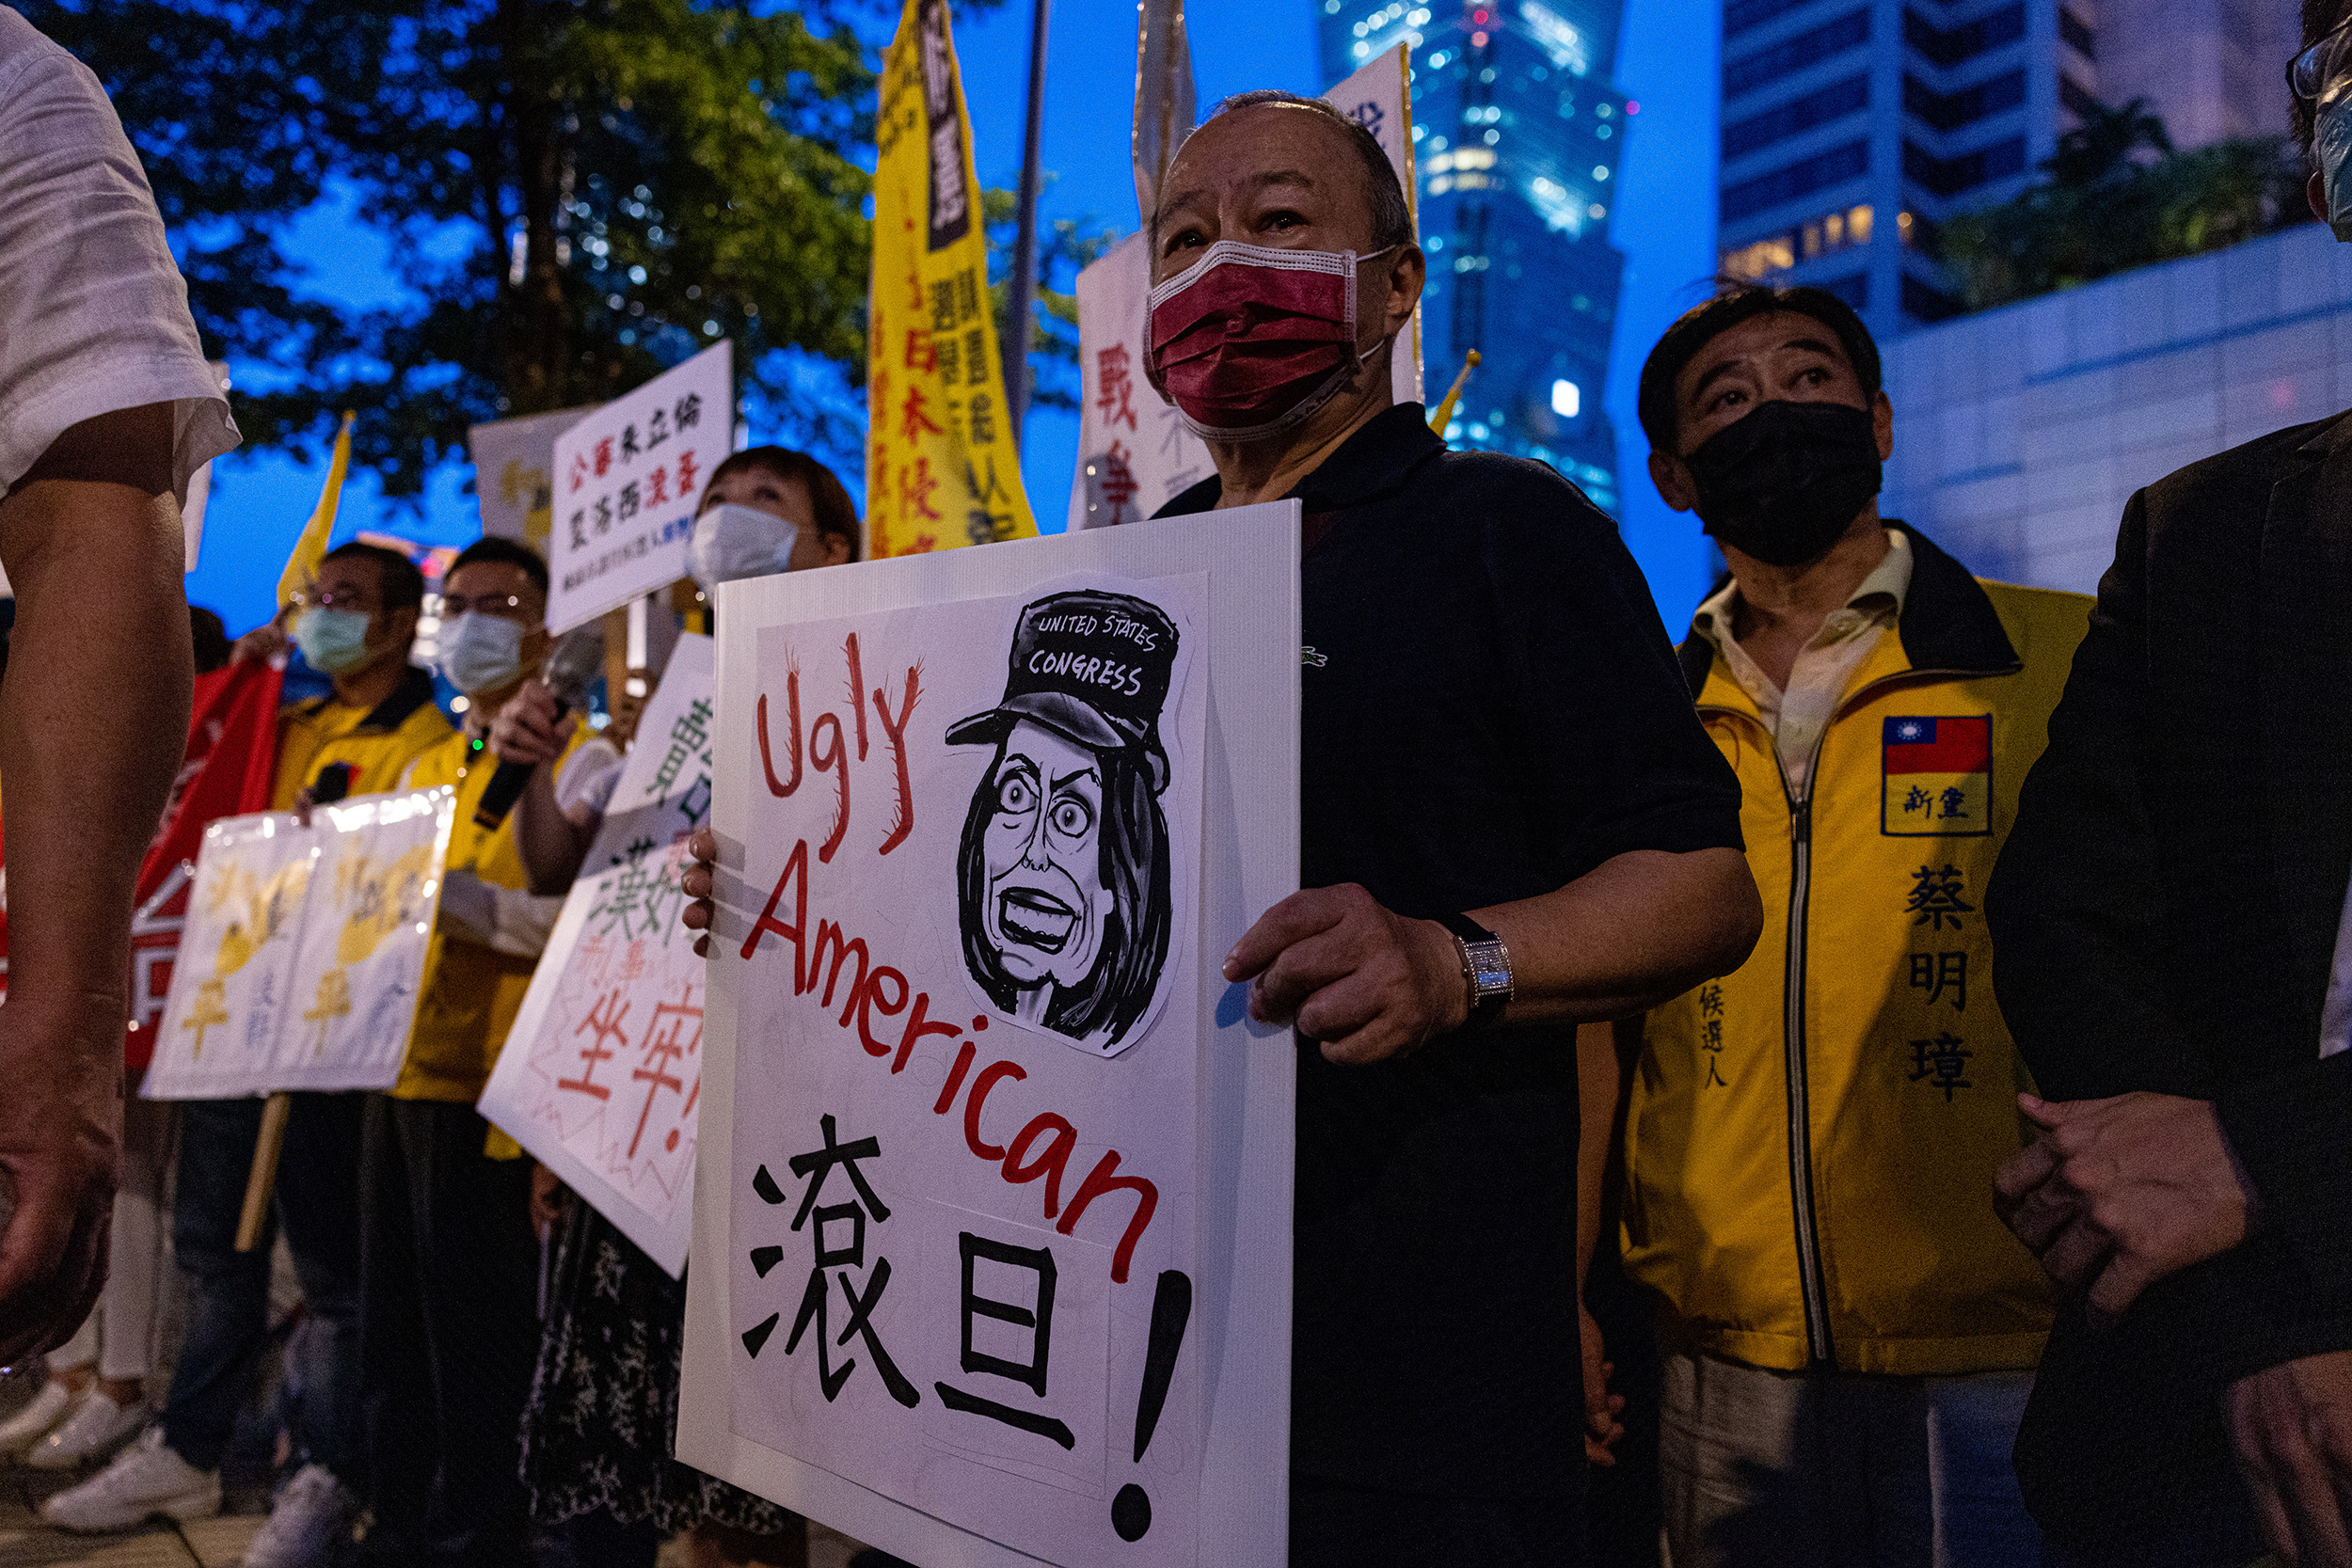 Demonstrators take part in a protest against US House Speaker Nancy Pelosi's visit on August 2, in Taipei, Taiwan.